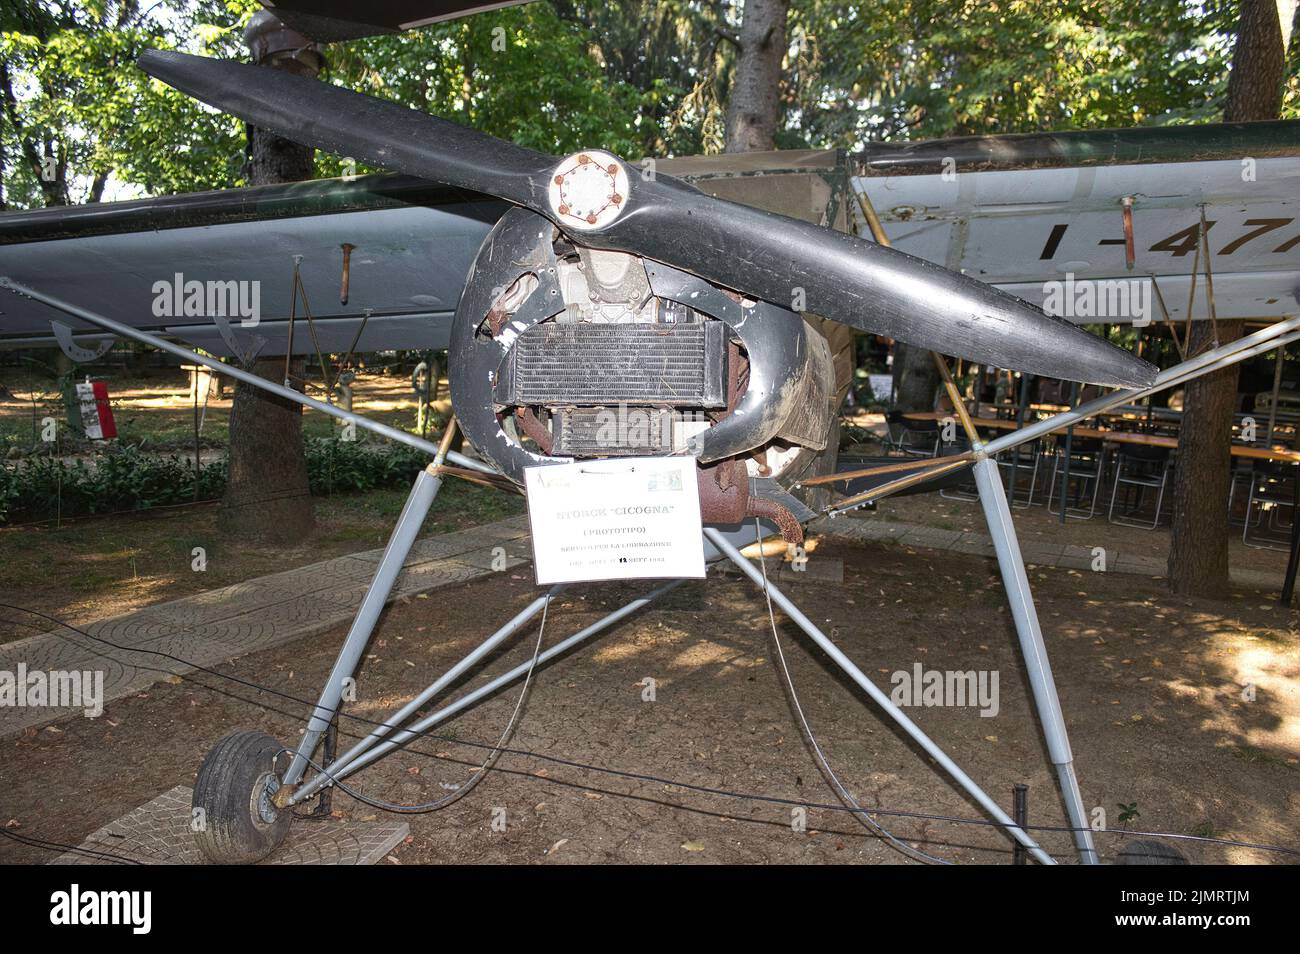 The Fieseler Fi 156 in the garden of VILLA CARPENA, the plane that was used by Otto Skorzeny to rescue Mussolini at Campo Imperatore, Stock Photo